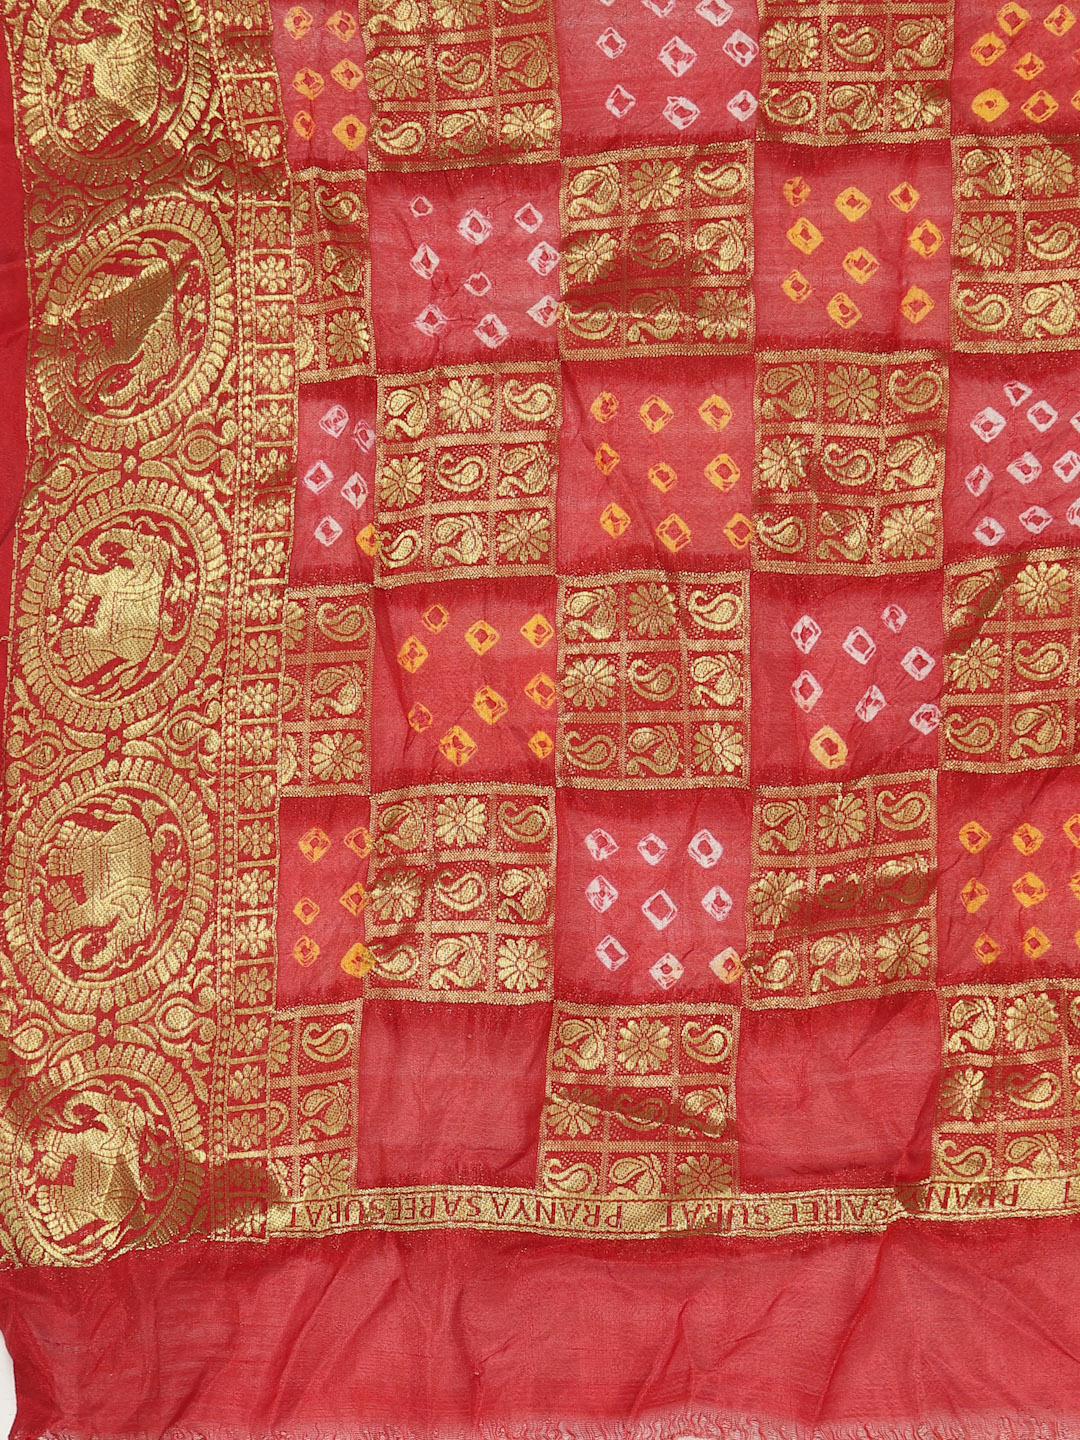 Women Silk Bandhani and Zari Weaving Saree with Unstitched Blouse - Red And Gold